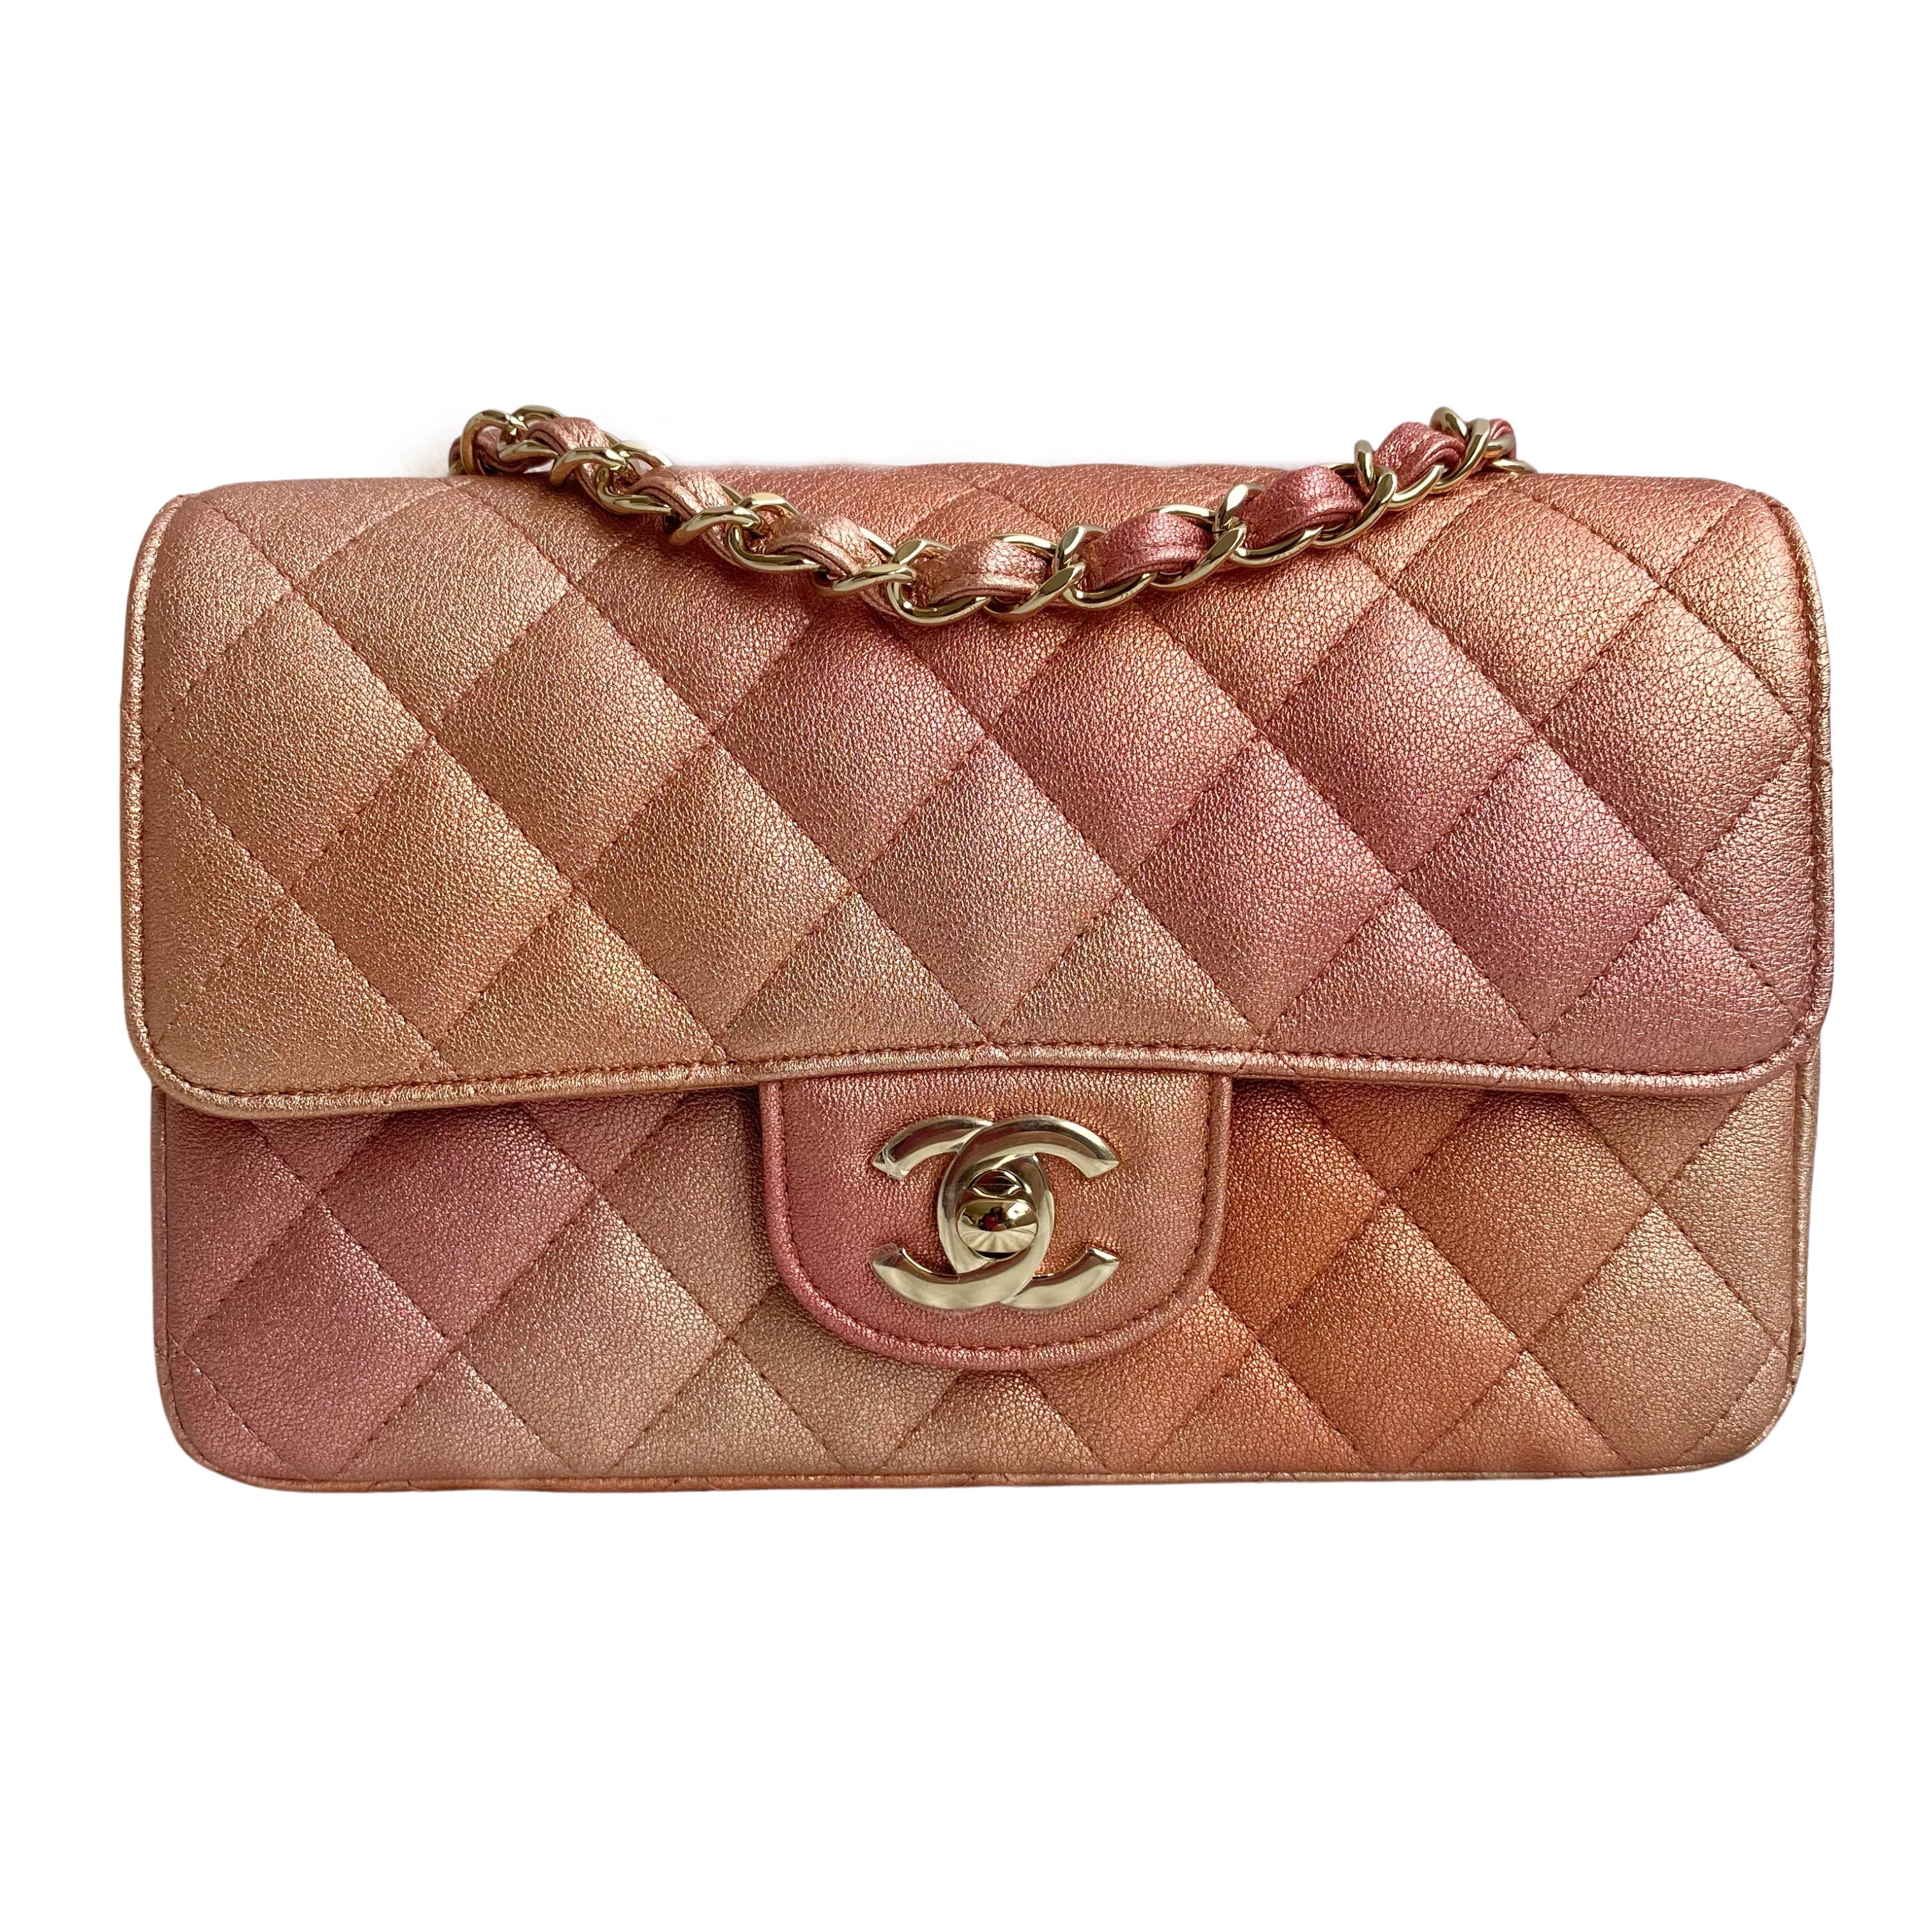 Chanel 2021 Pink Gold-Tone (Rose Gold Hardware) – Coco Approved Studio